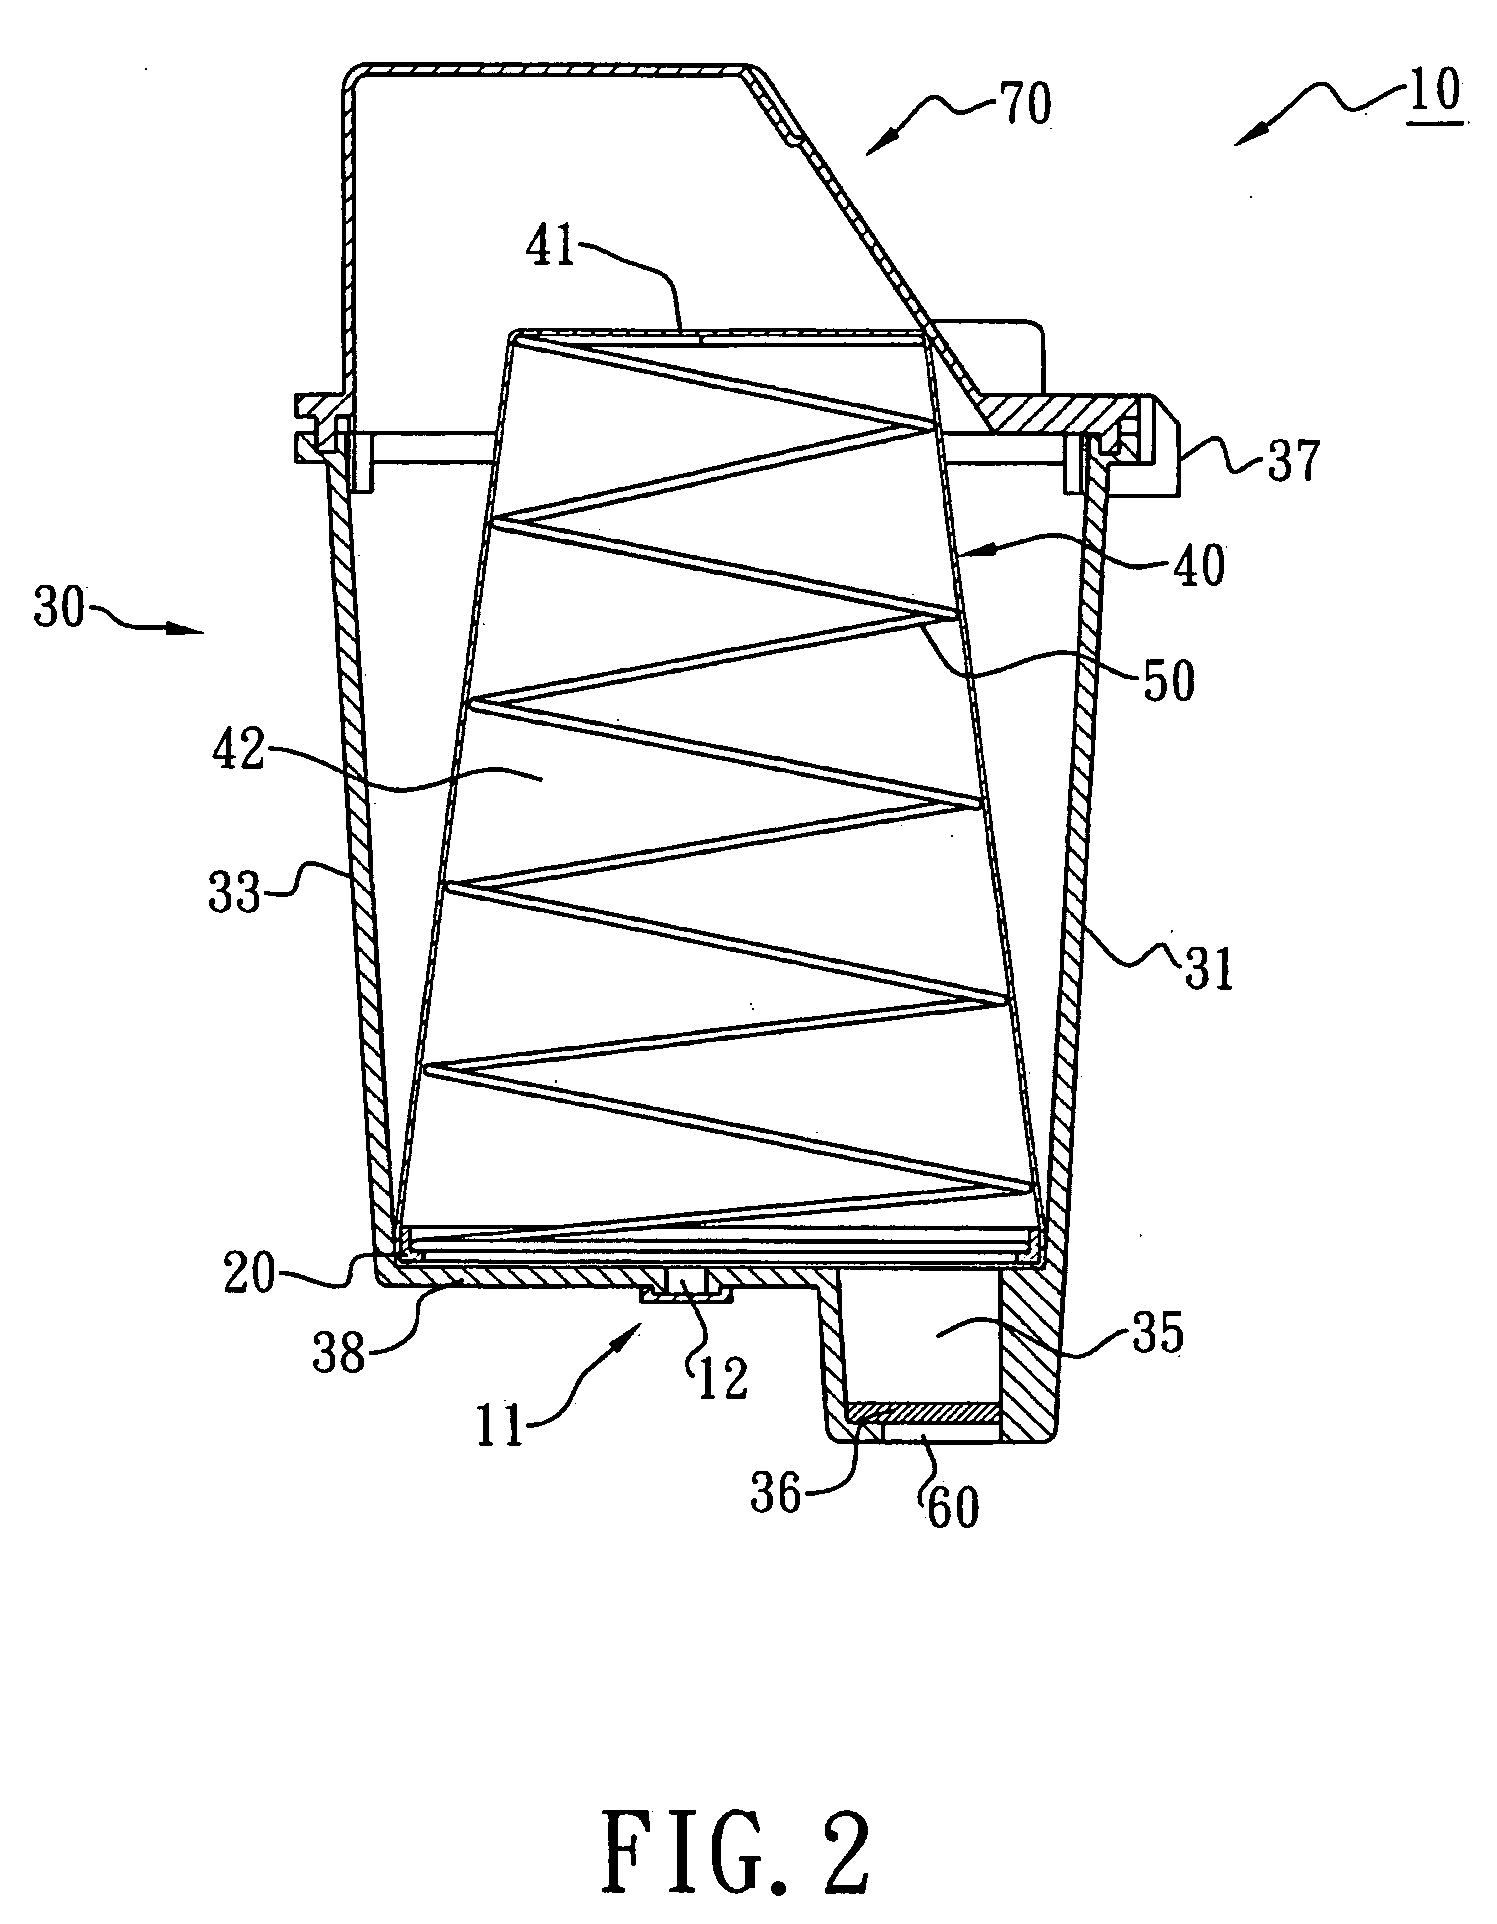 Ink-jet printing apparatus with configuration of spring and flexible pocket